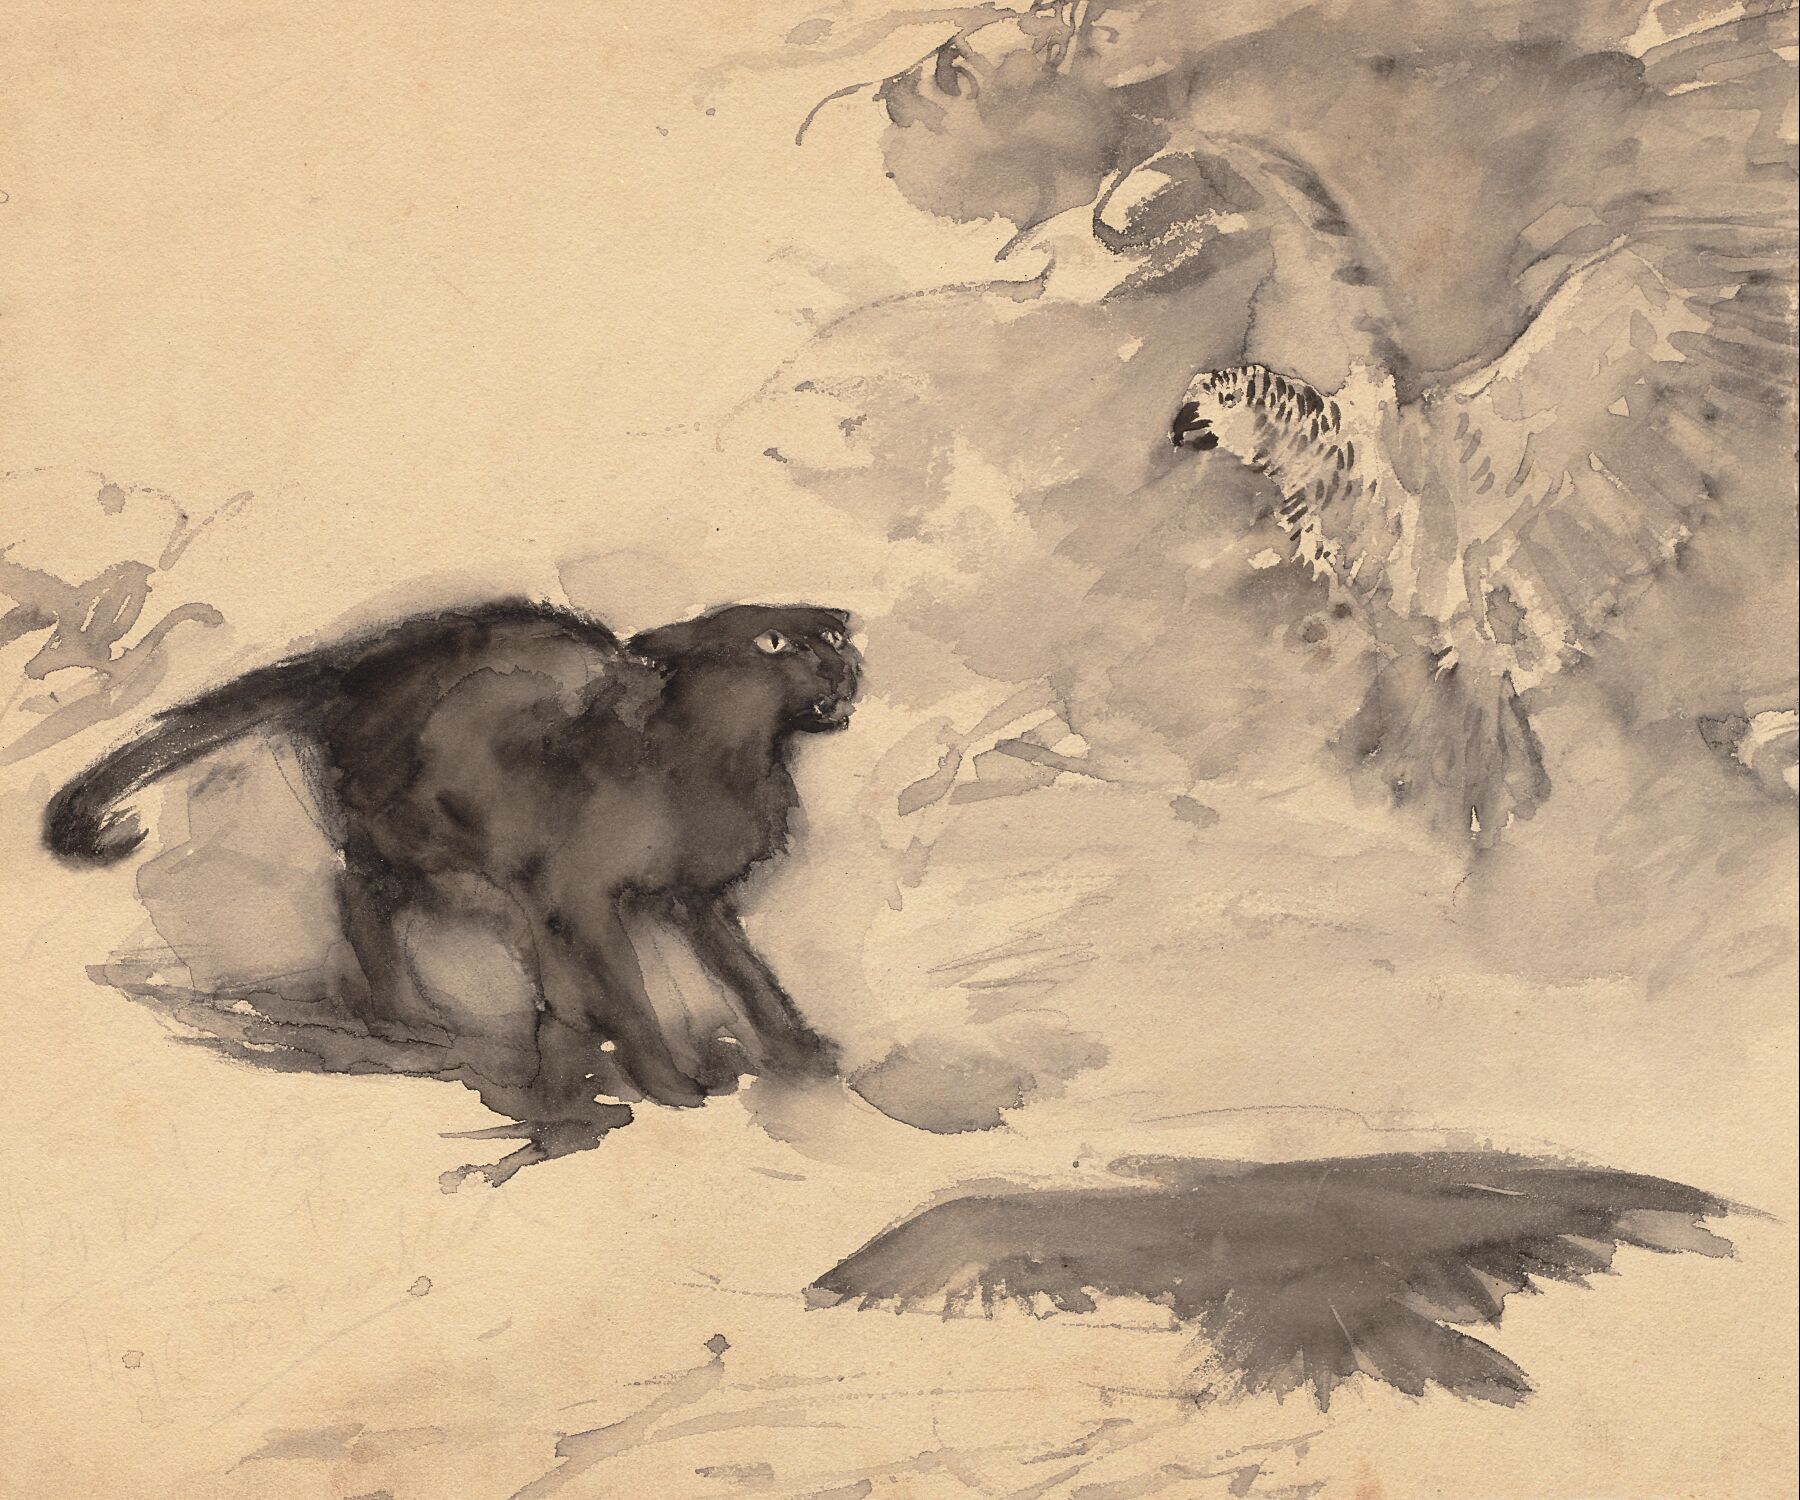 The Cat and the Eagle by Arthur Rackham - date unknown